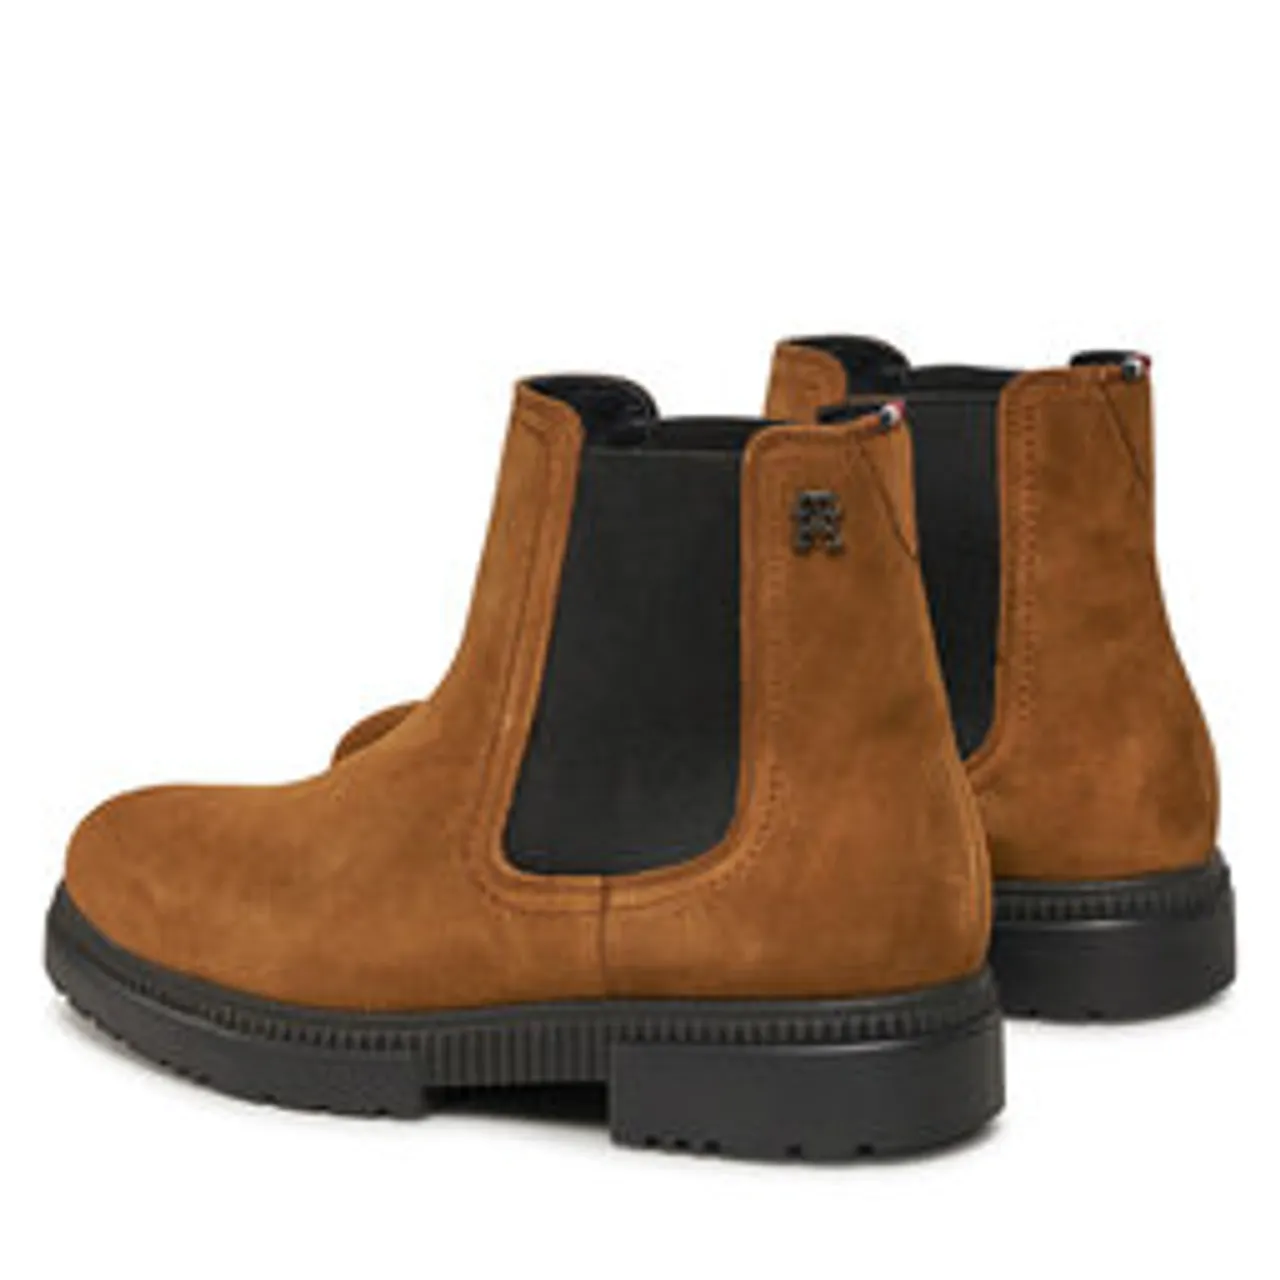 Klassische Stiefeletten Tommy Hilfiger Casual Cleated Suede Chelsea FM0FM05037 Coconut Grove GVQ